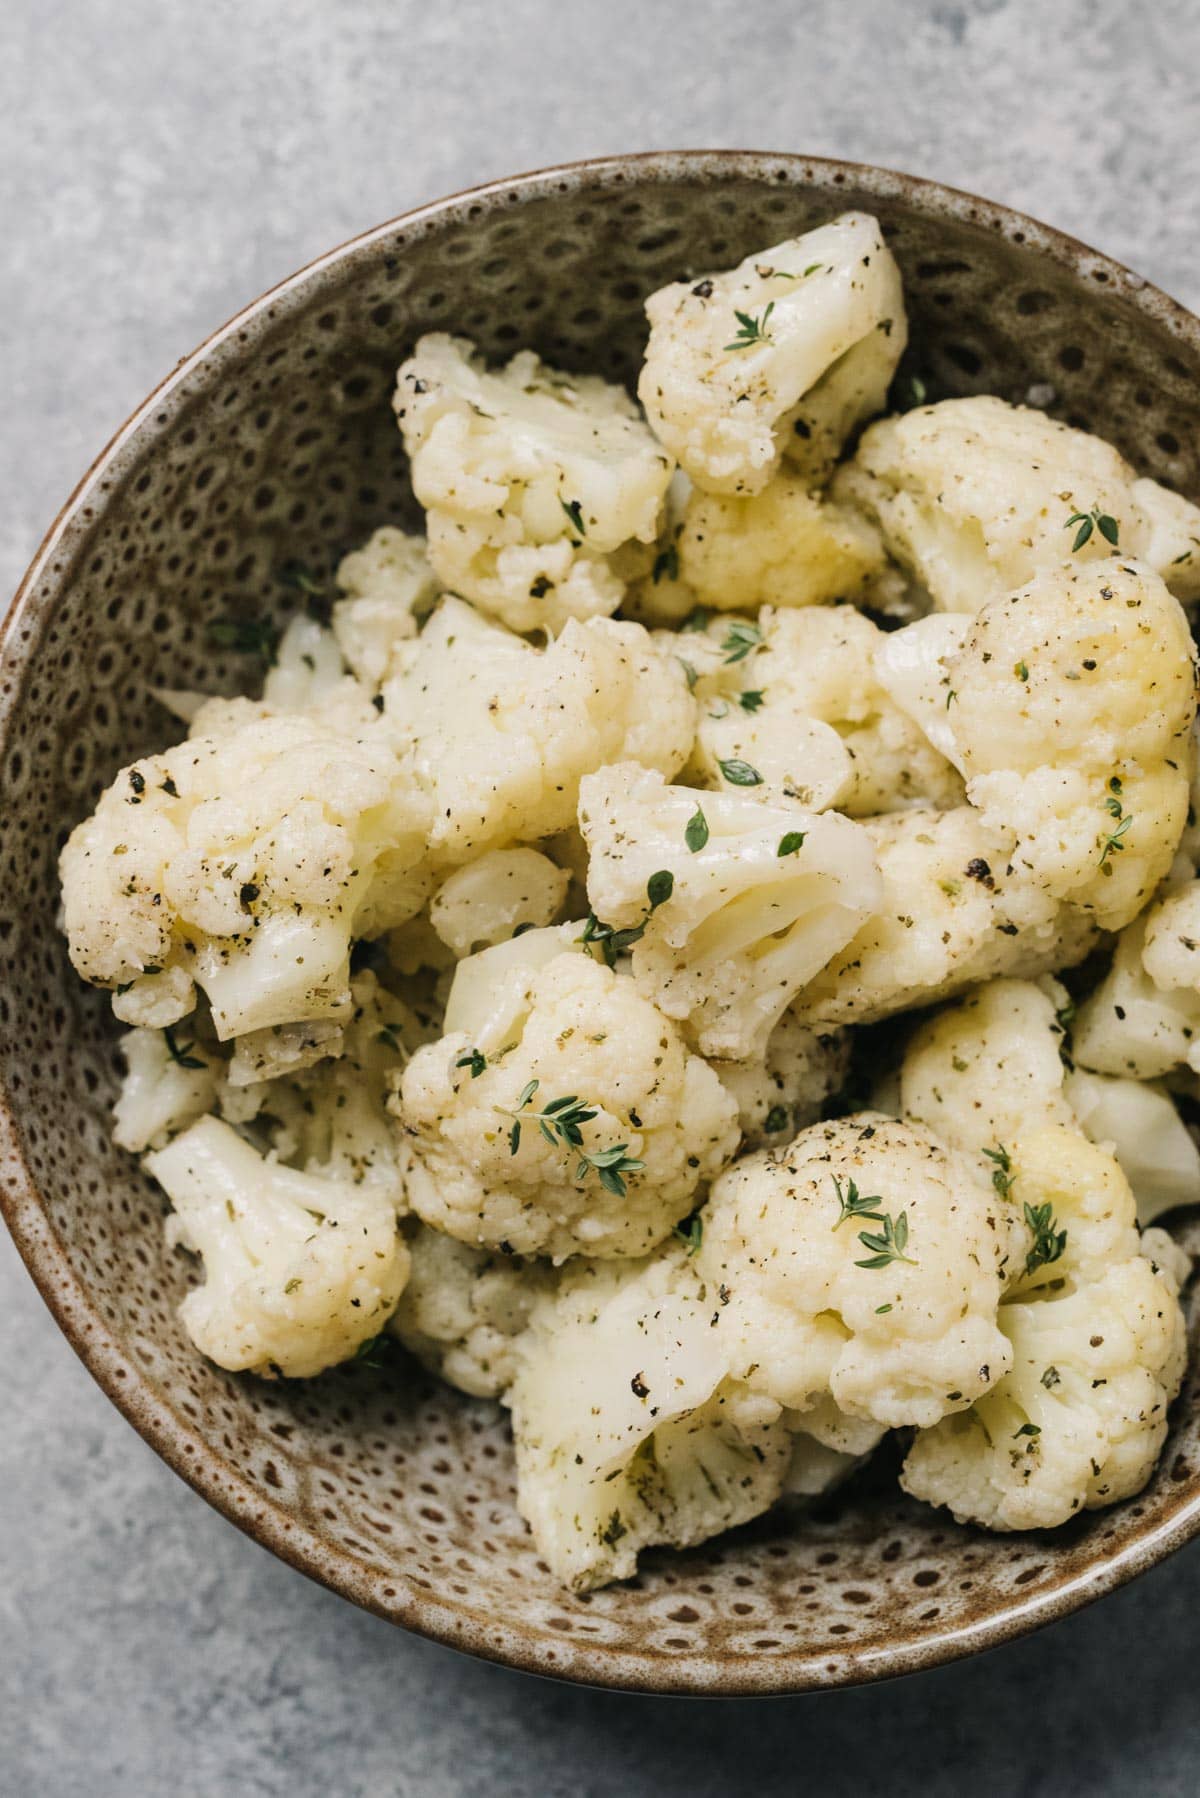 Steamed cauliflower florets tossed with olive oil, Italian seasoning, and fresh thyme in a brown speckled bowl on a concrete background.